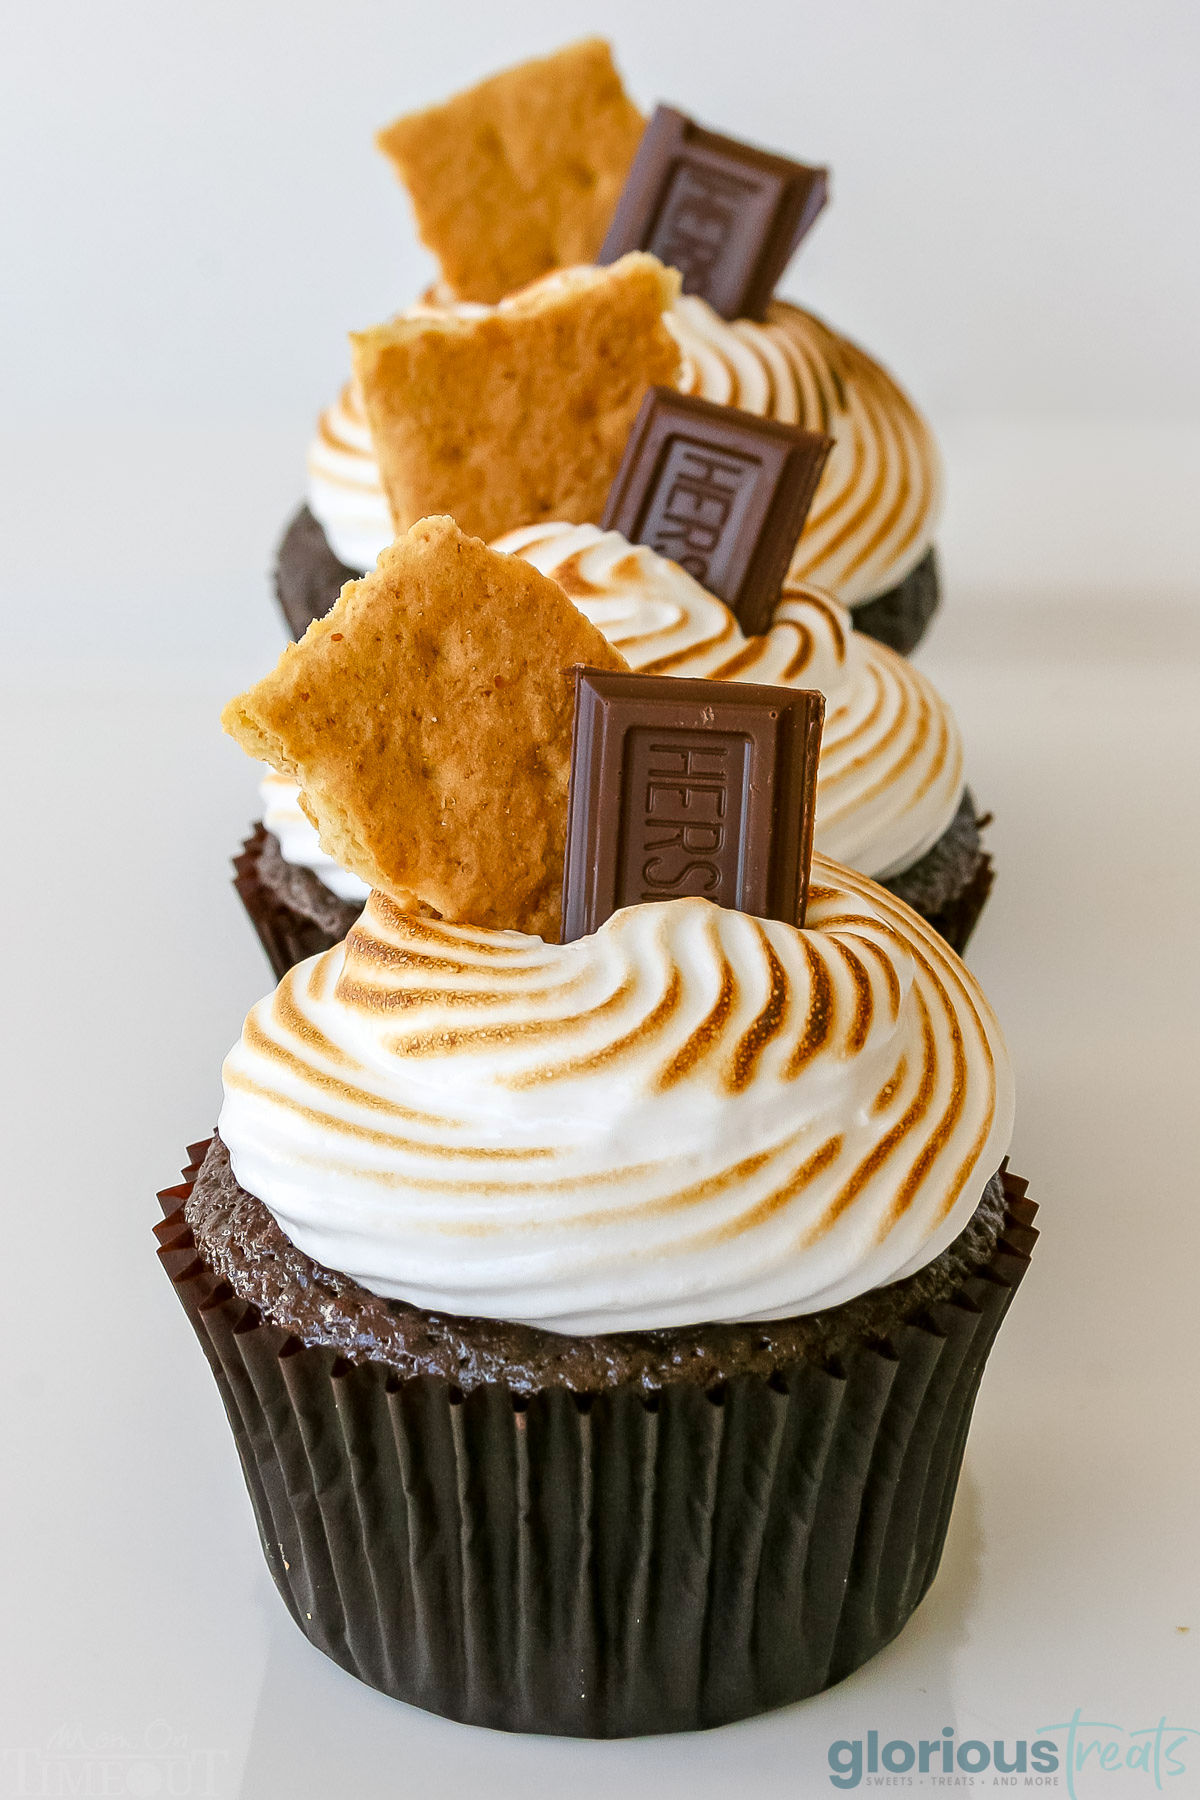 Three smores cupcakes lined up in a row on a white surface. Cupcakes have been topped with marshmallow frosting, graham crackers and chocolate candy.